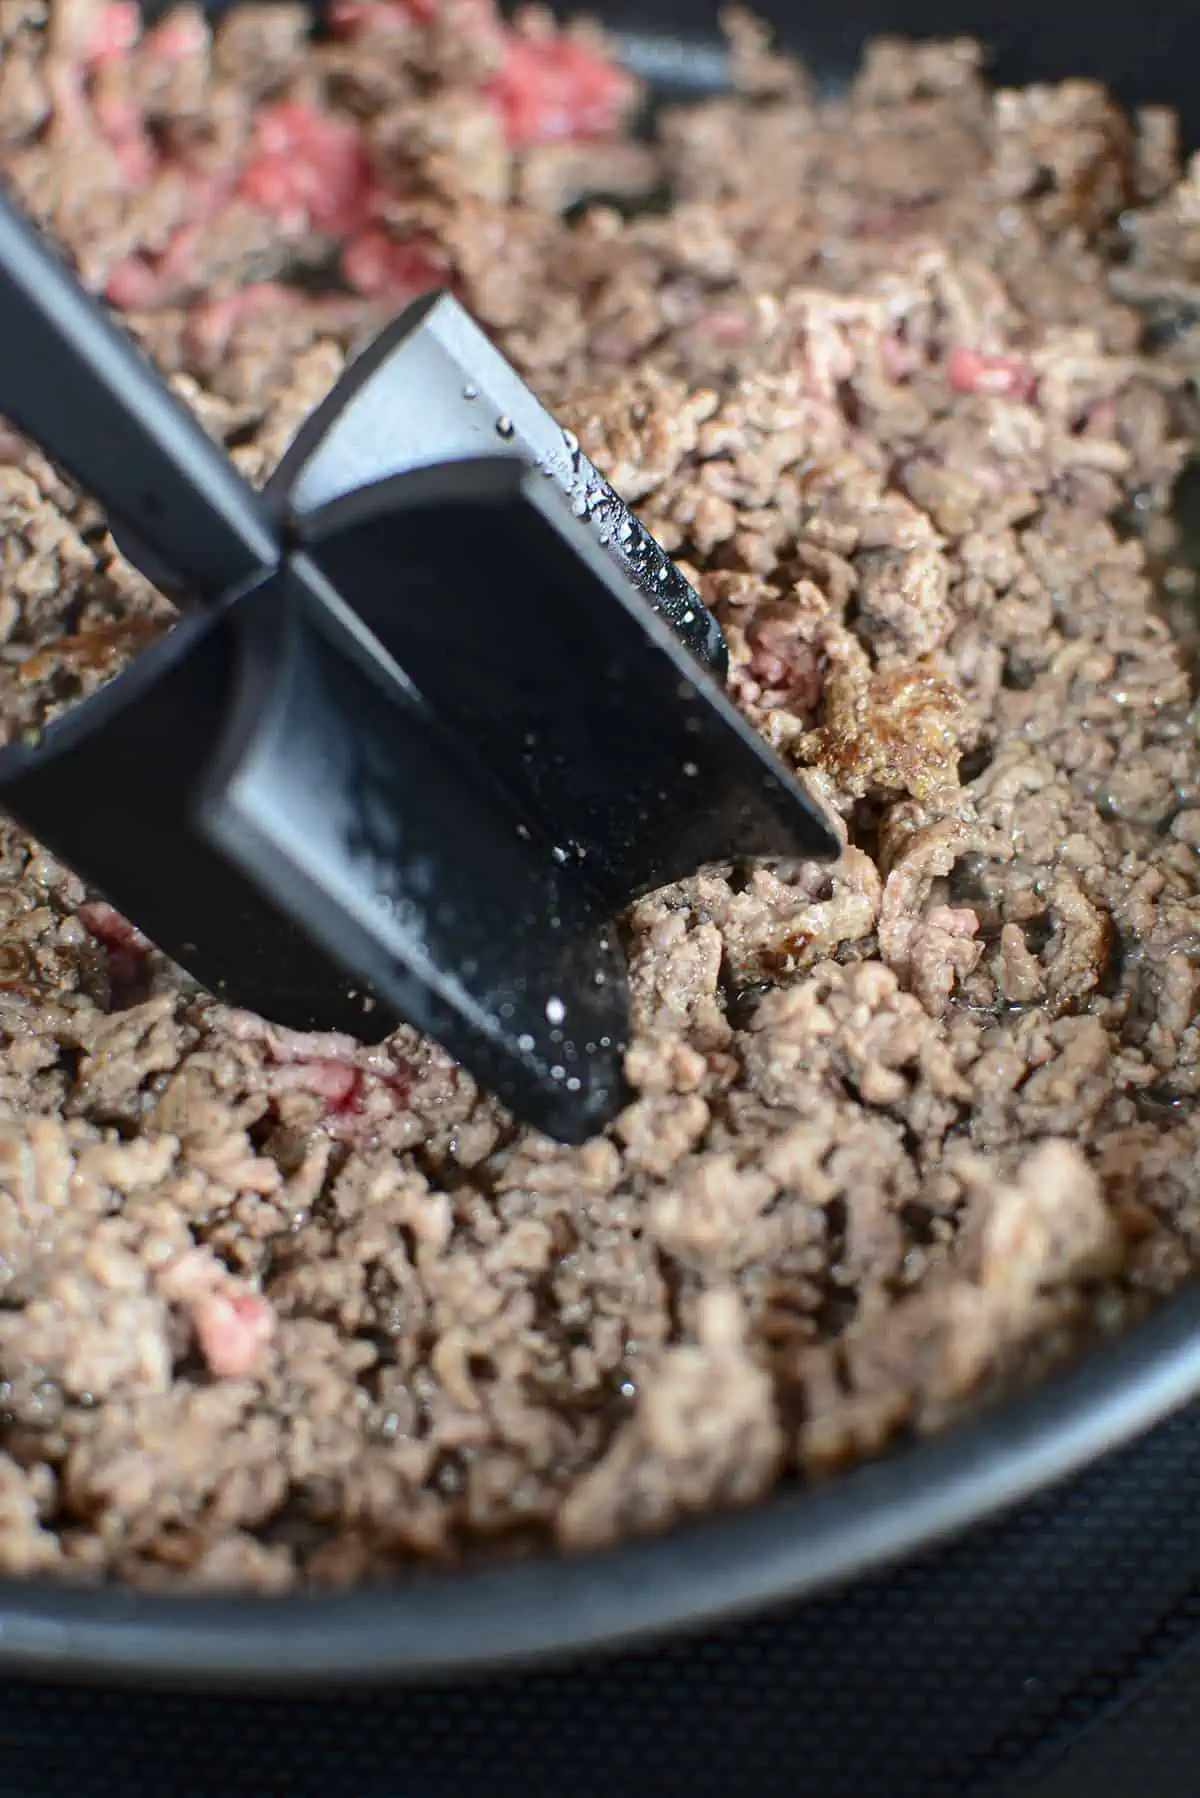 A meat chopper breaking up large ground beef crumbles.